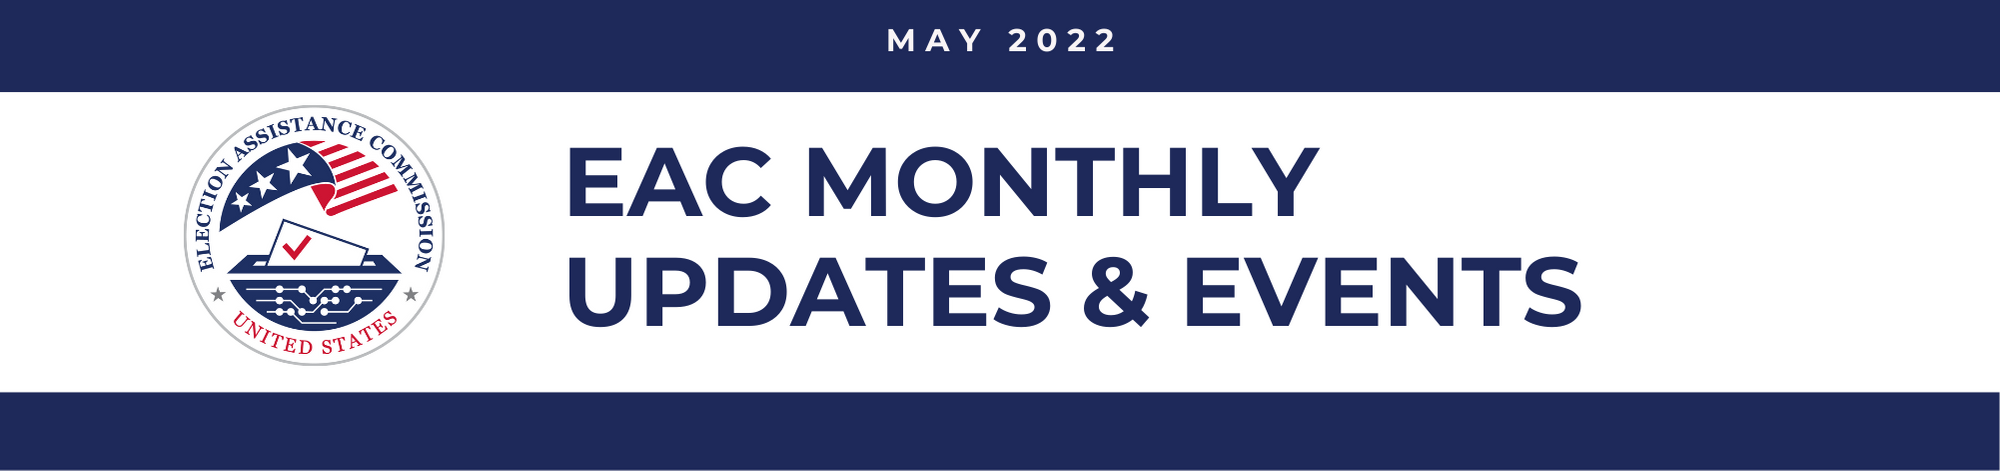 May 2022 EAC Monthly Updates & Events